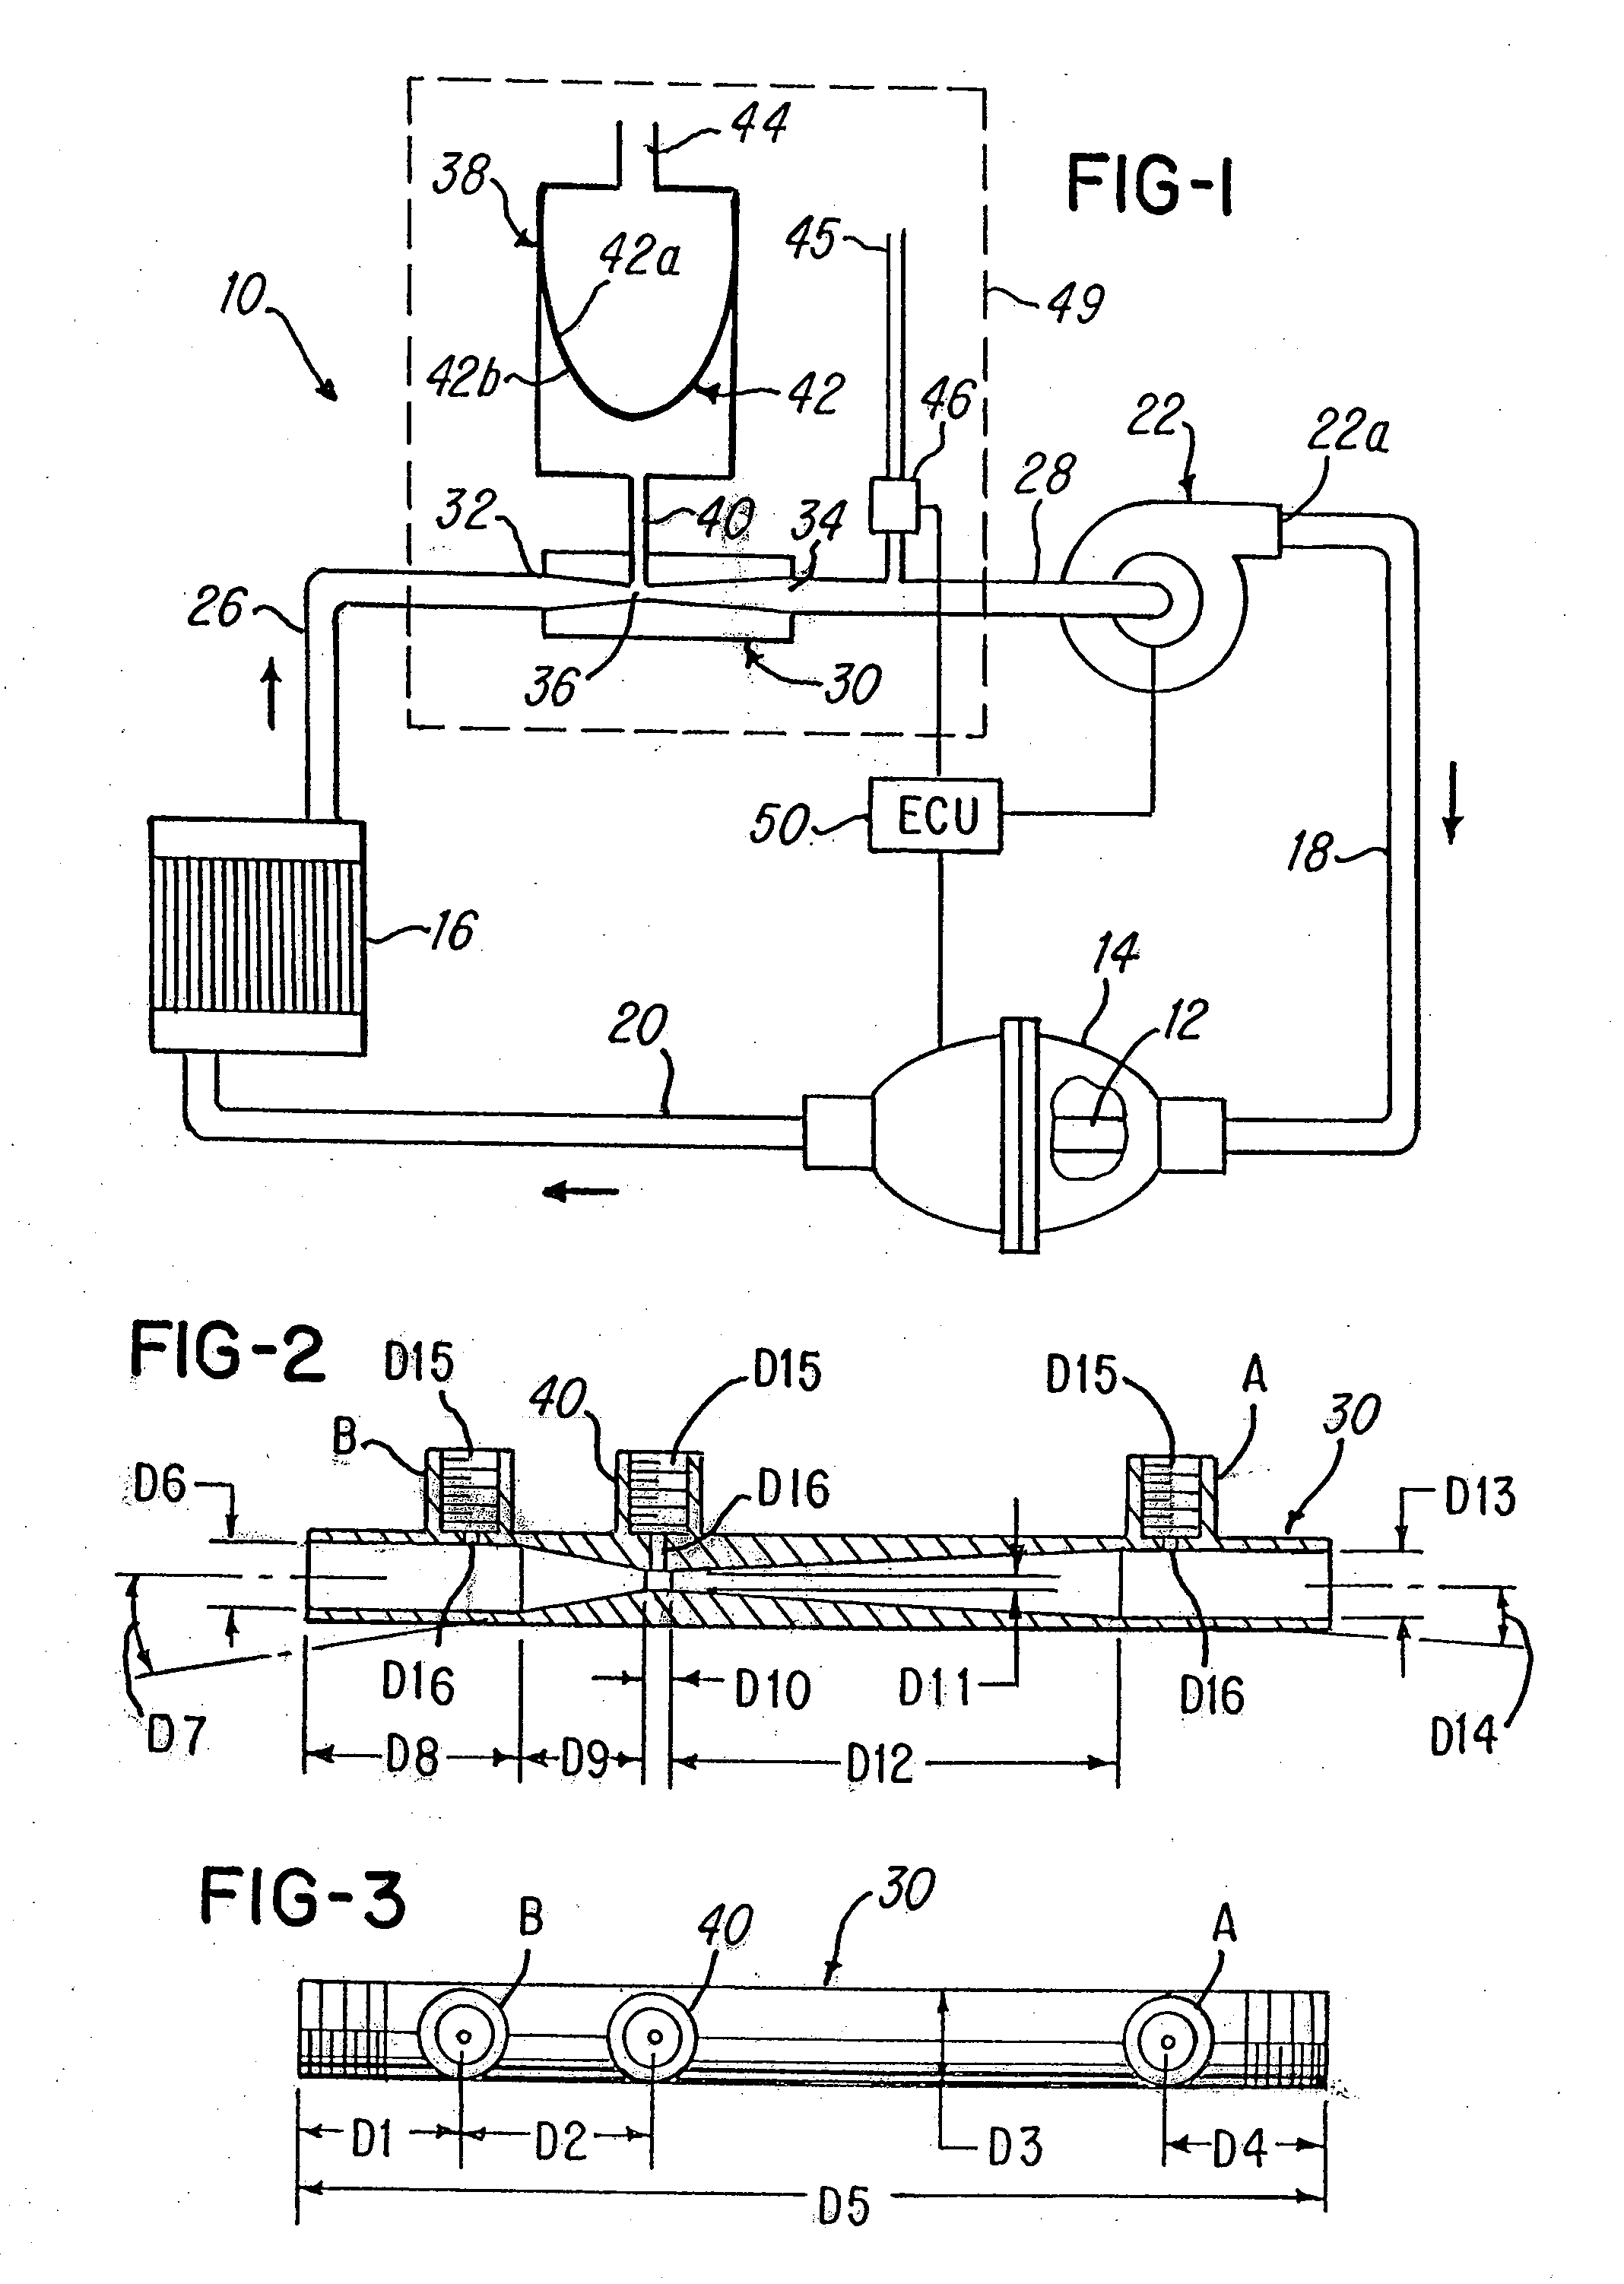 Method and system for cooling heat-generating component in a closed-loop system